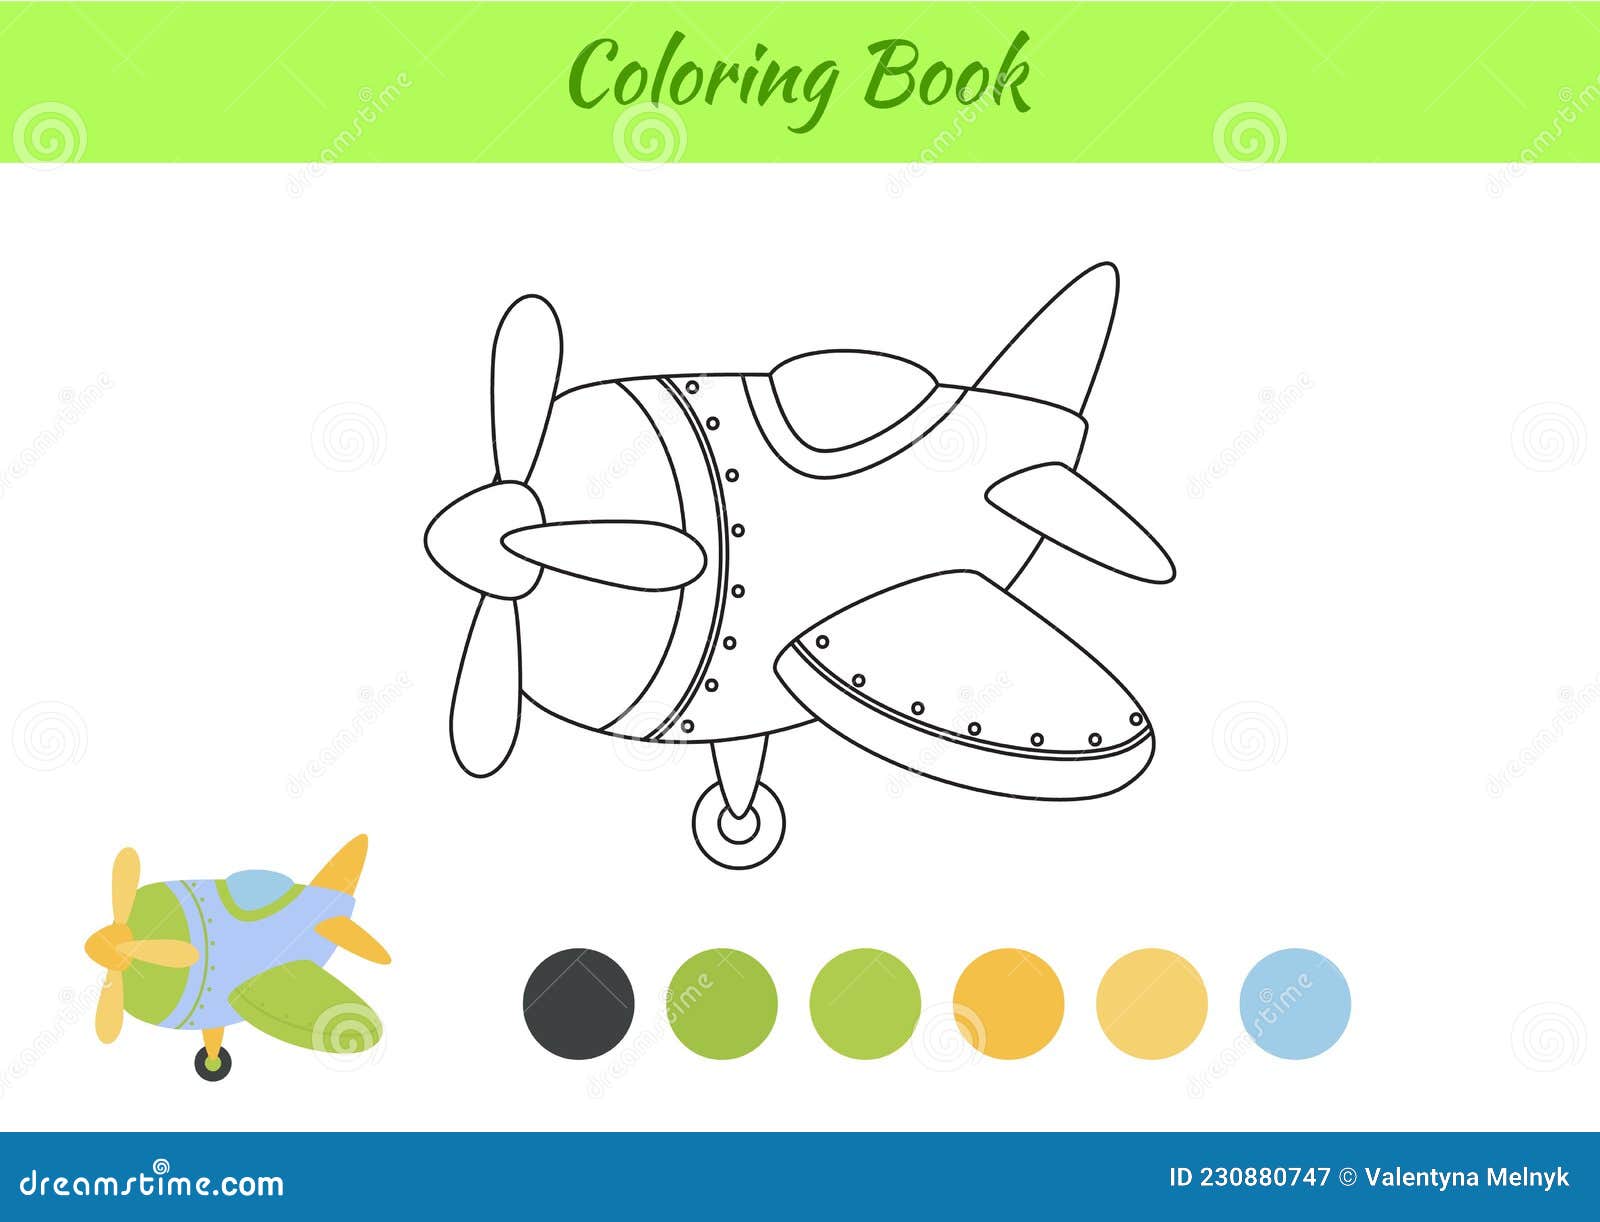 Coloring Book Airplane for Children. Educational Activity Page for ...